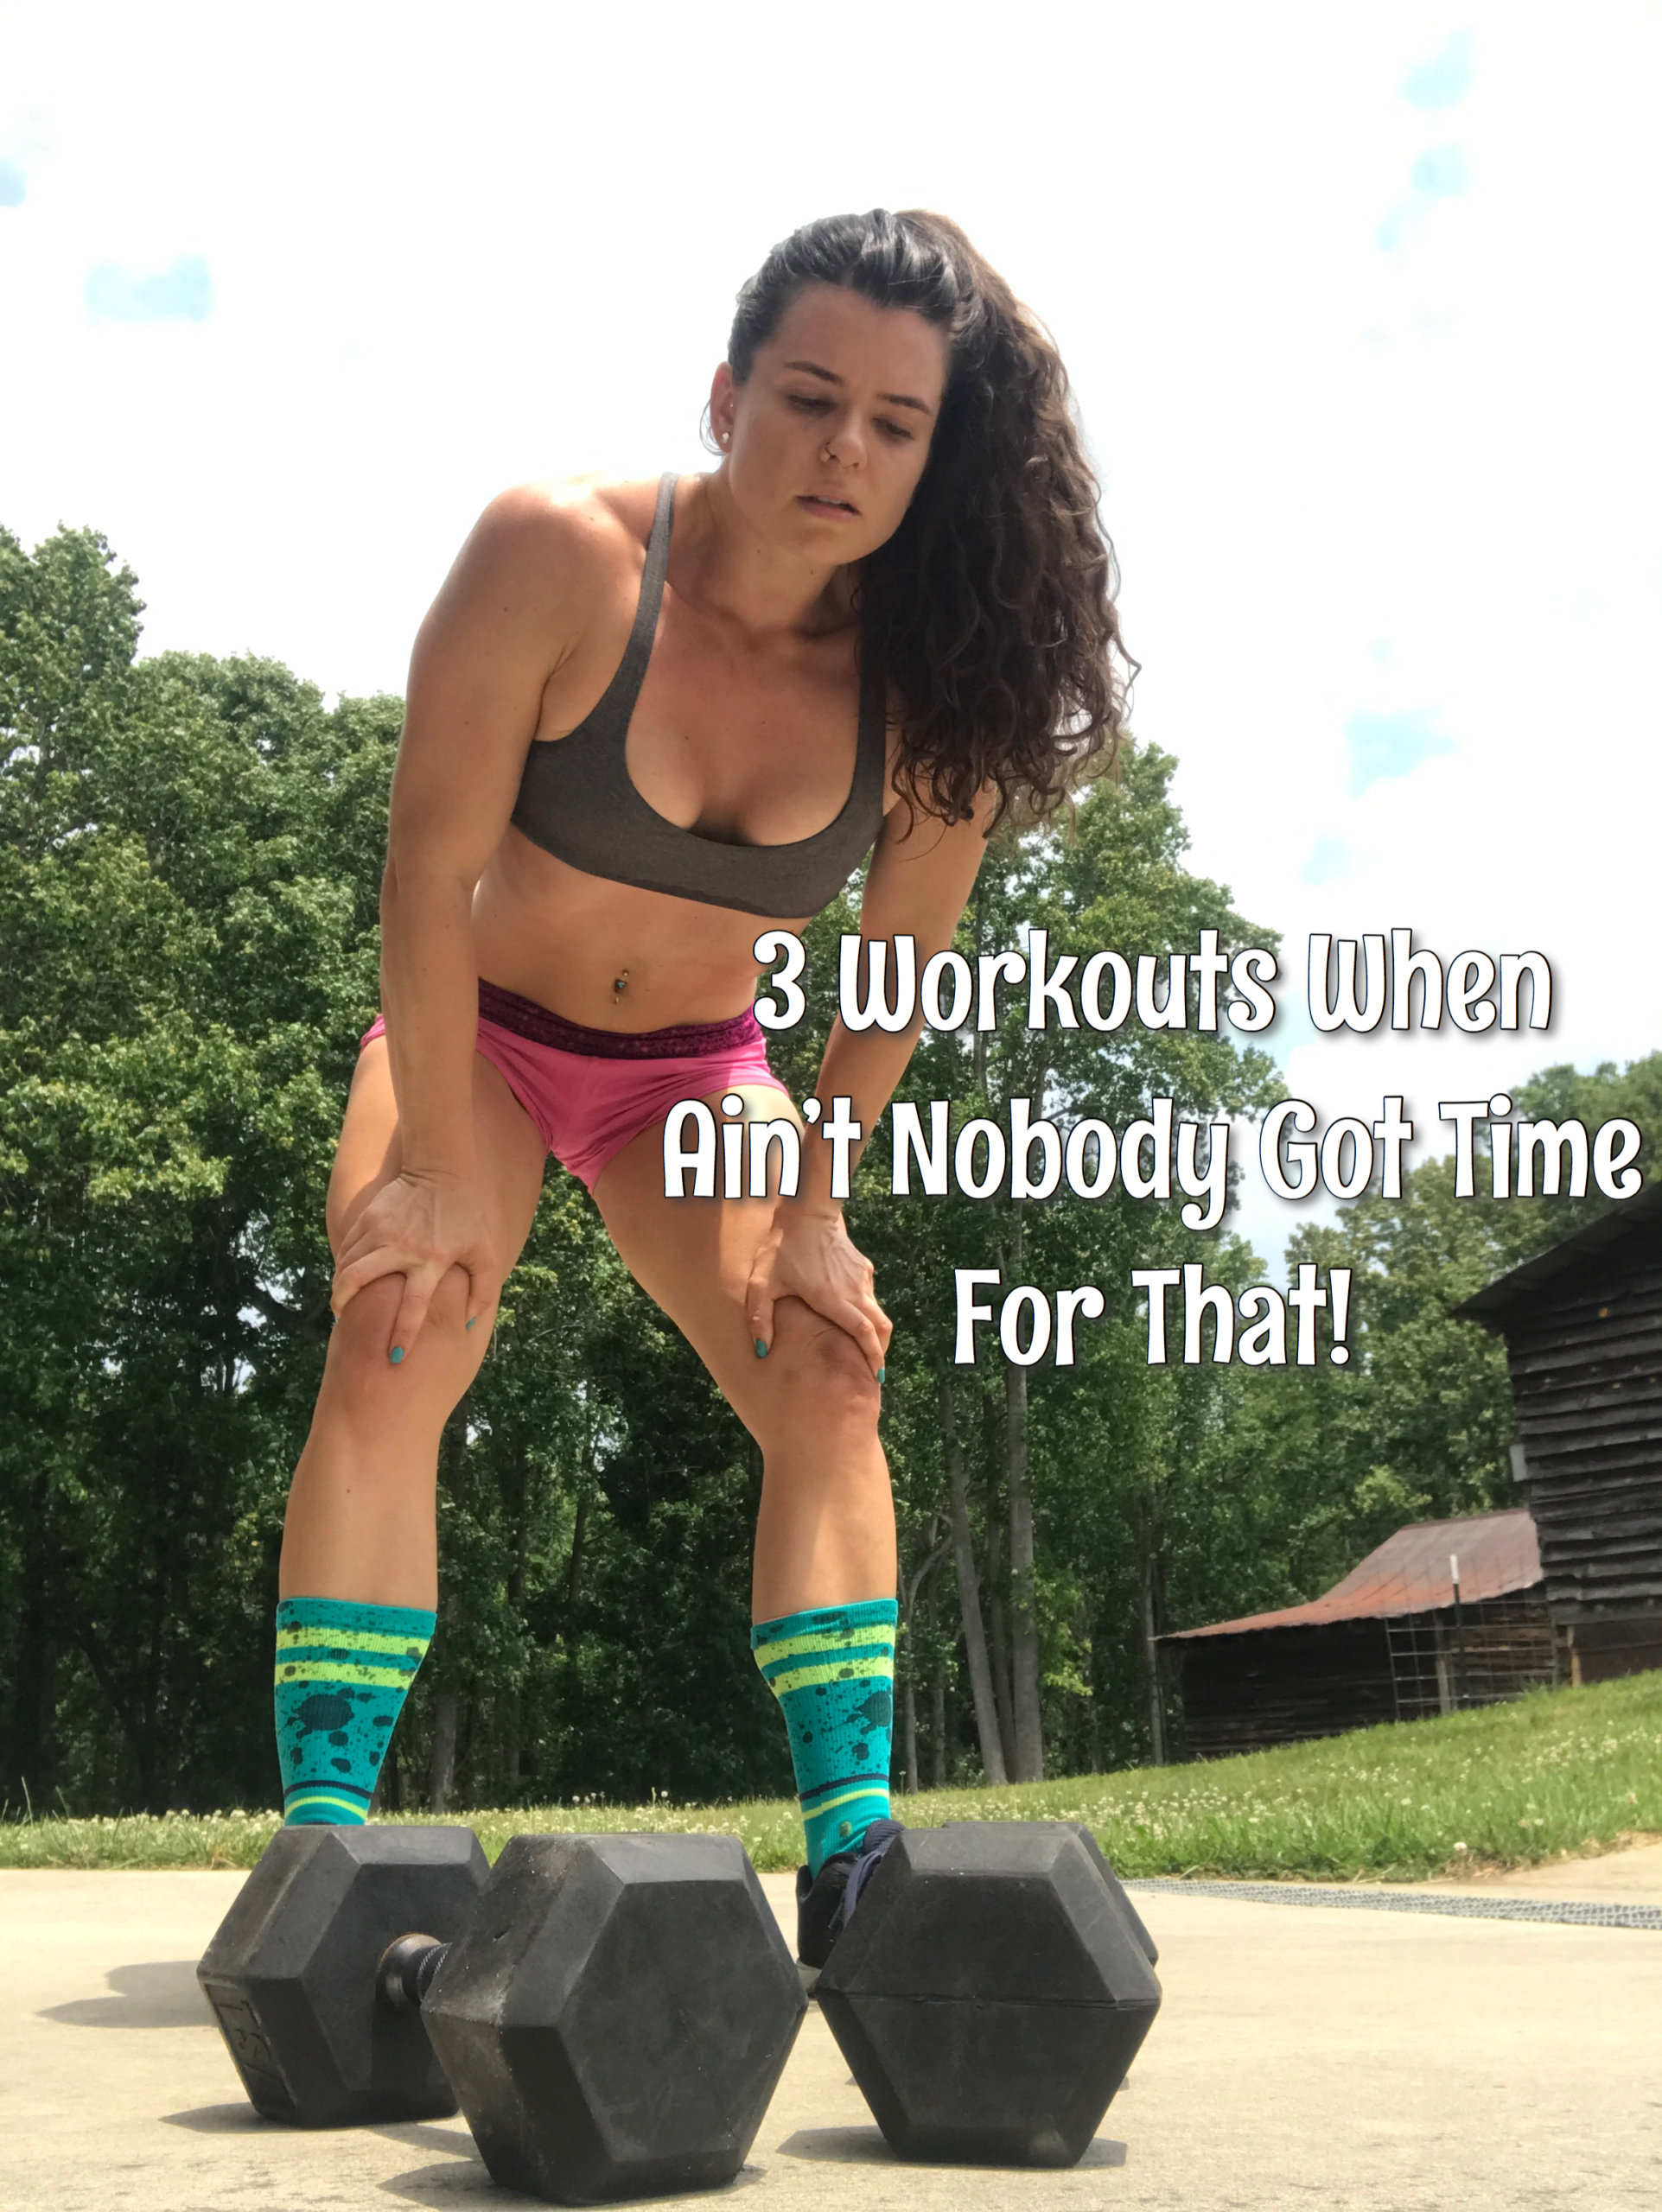 3 Workouts When Ain’t Nobody Got Time For That!